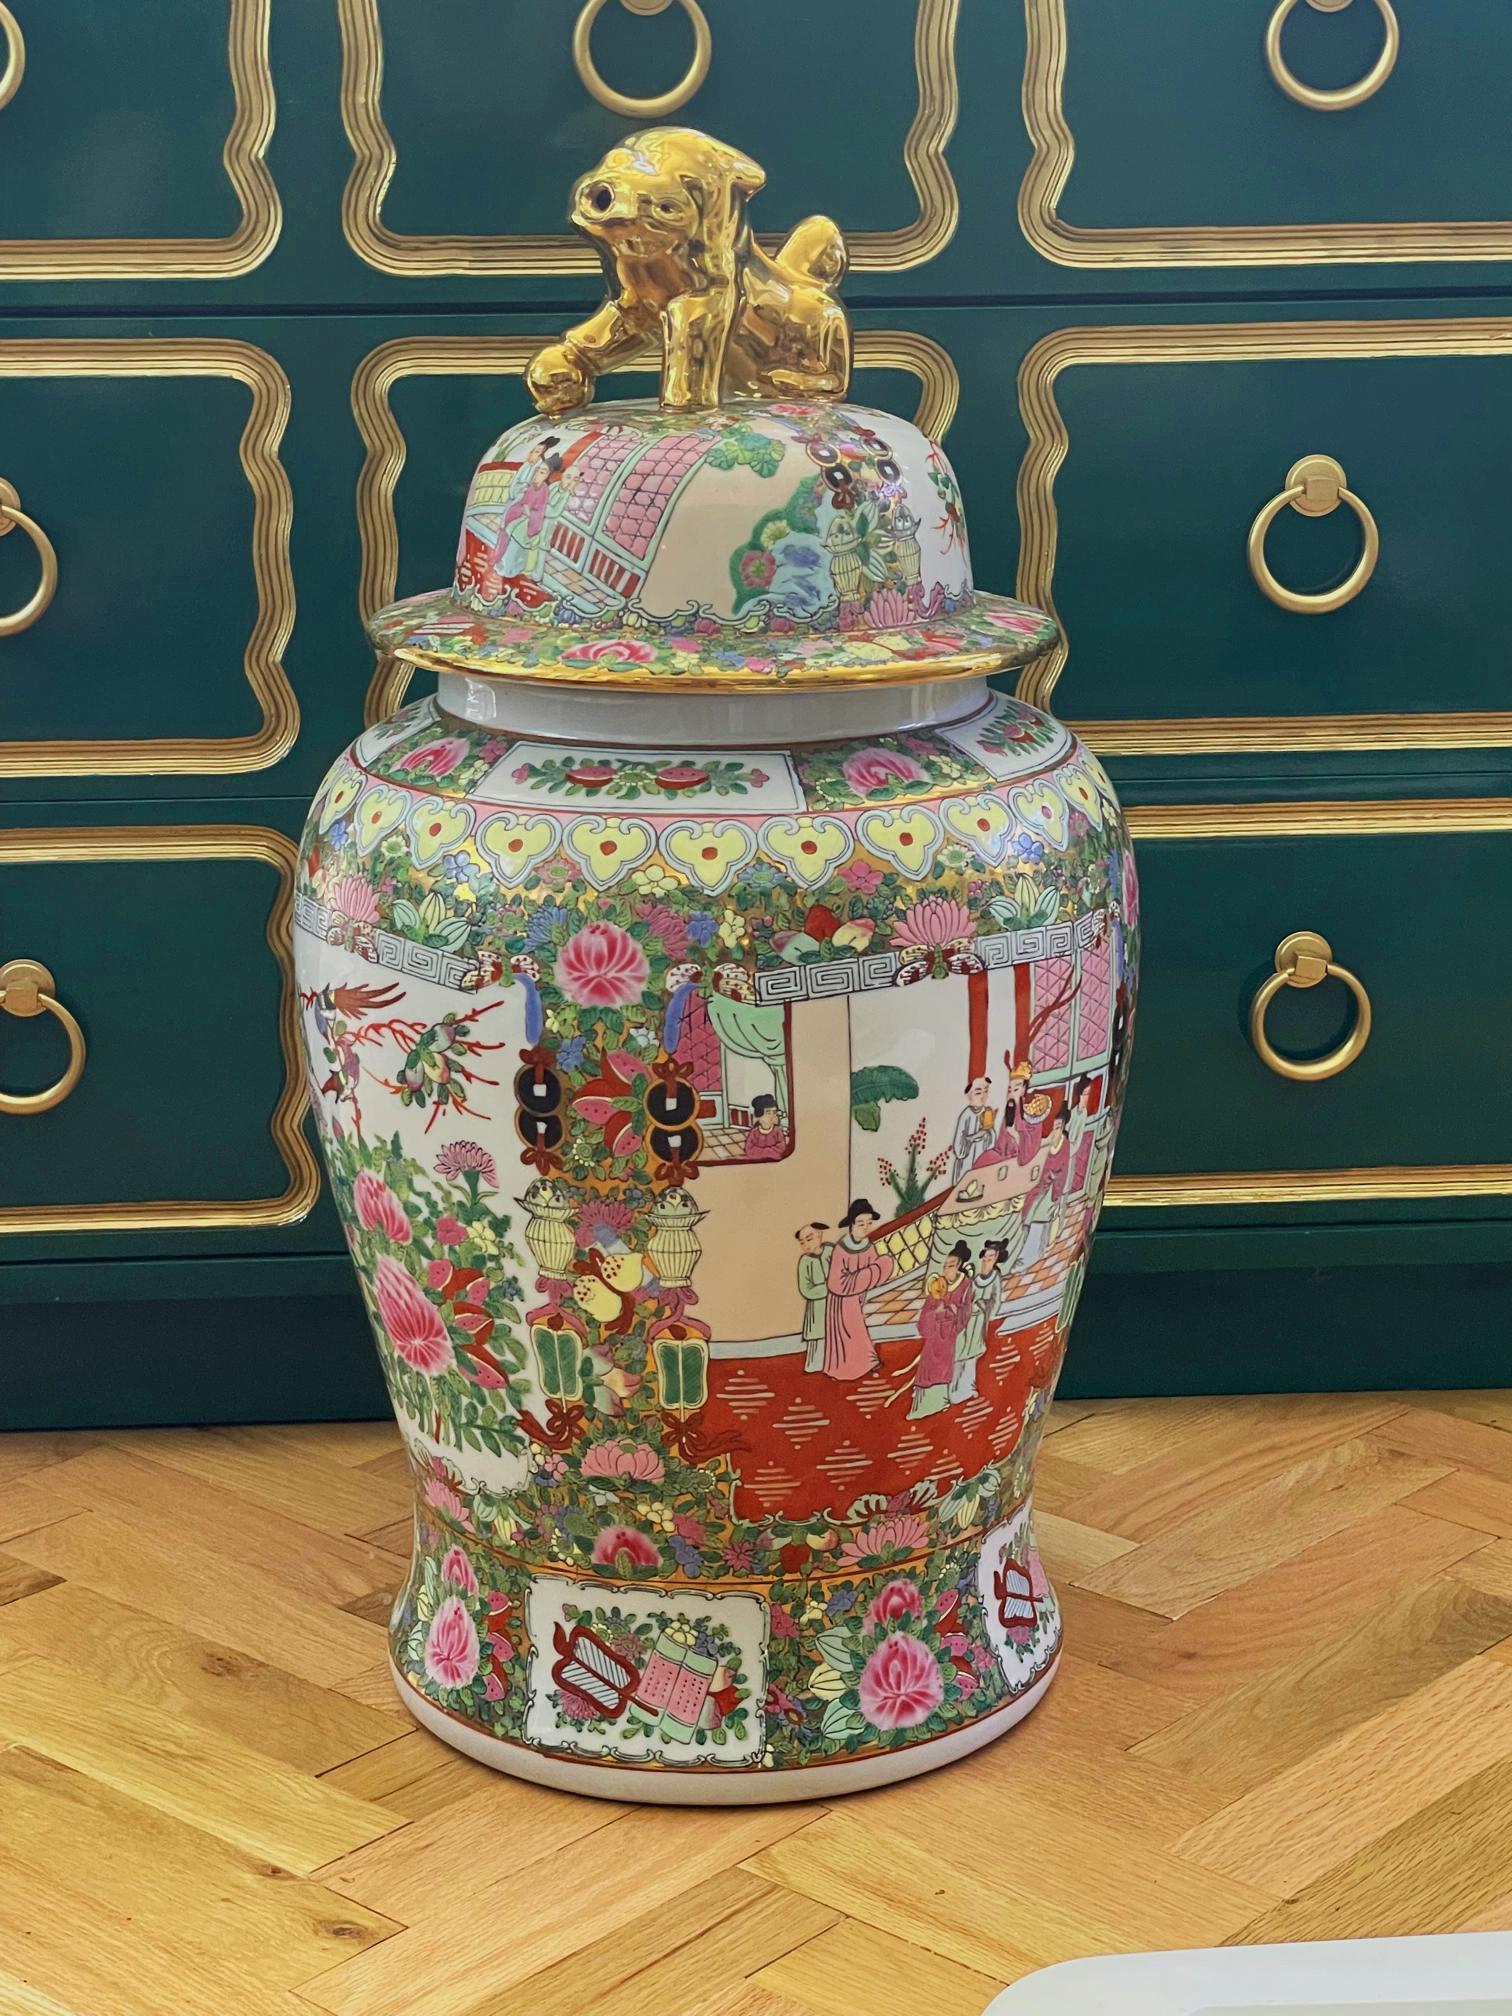 Large ceramic floor vase or urn features Chinese chinoiserie hand painted body and lid, depicting Oriental scenes along with birds and flora. Domed lid features a gold foo dog as handle. Maker's mark present on bottom. Good condition with minor